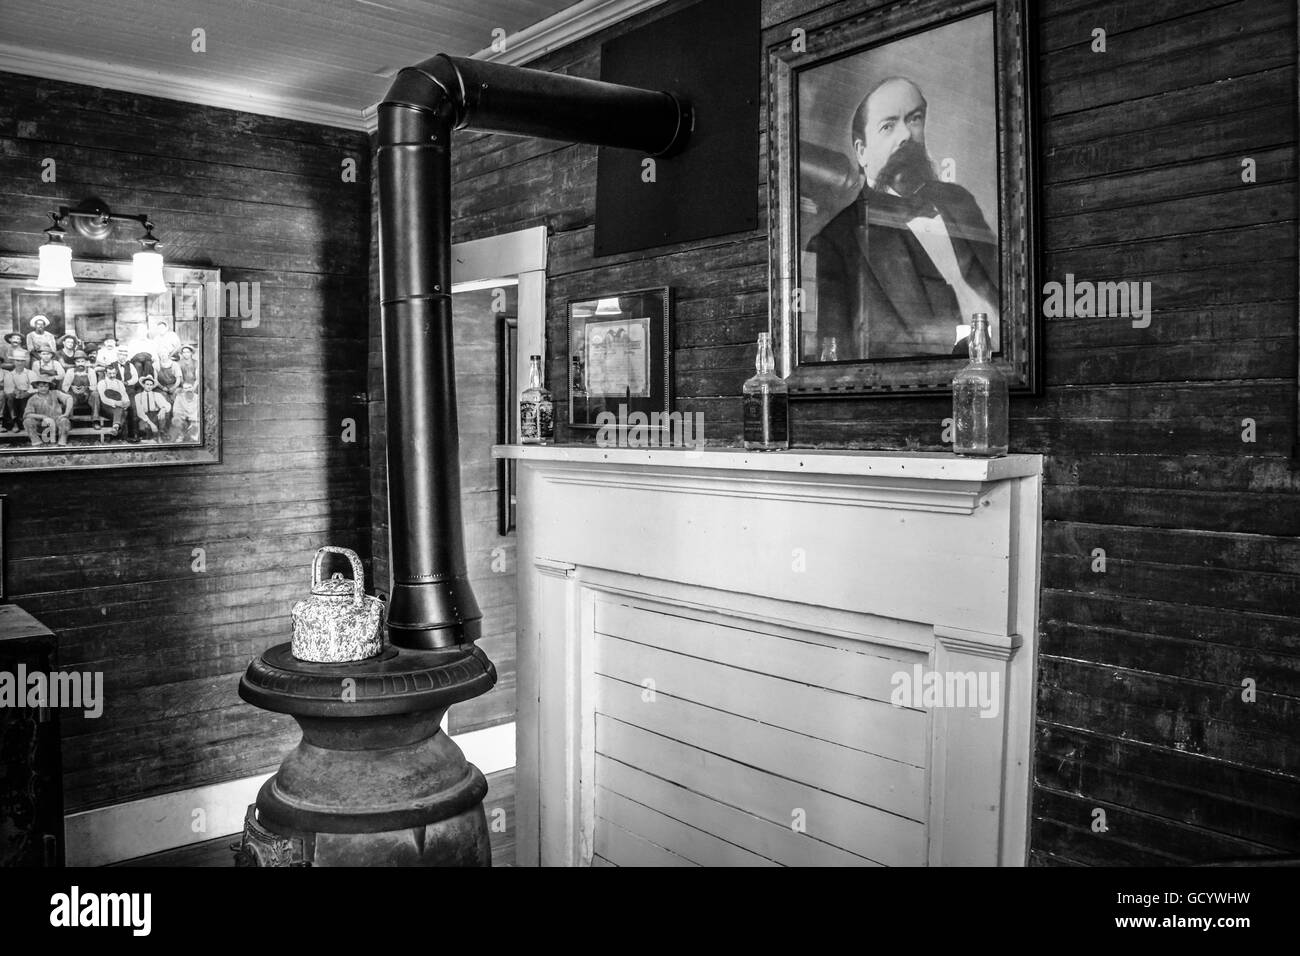 A photo of Jack Daniel hangs over the mantel & pot bellied stove in the interior of the preserved antique Distillery Office in Lynchburg, TN, USA Stock Photo